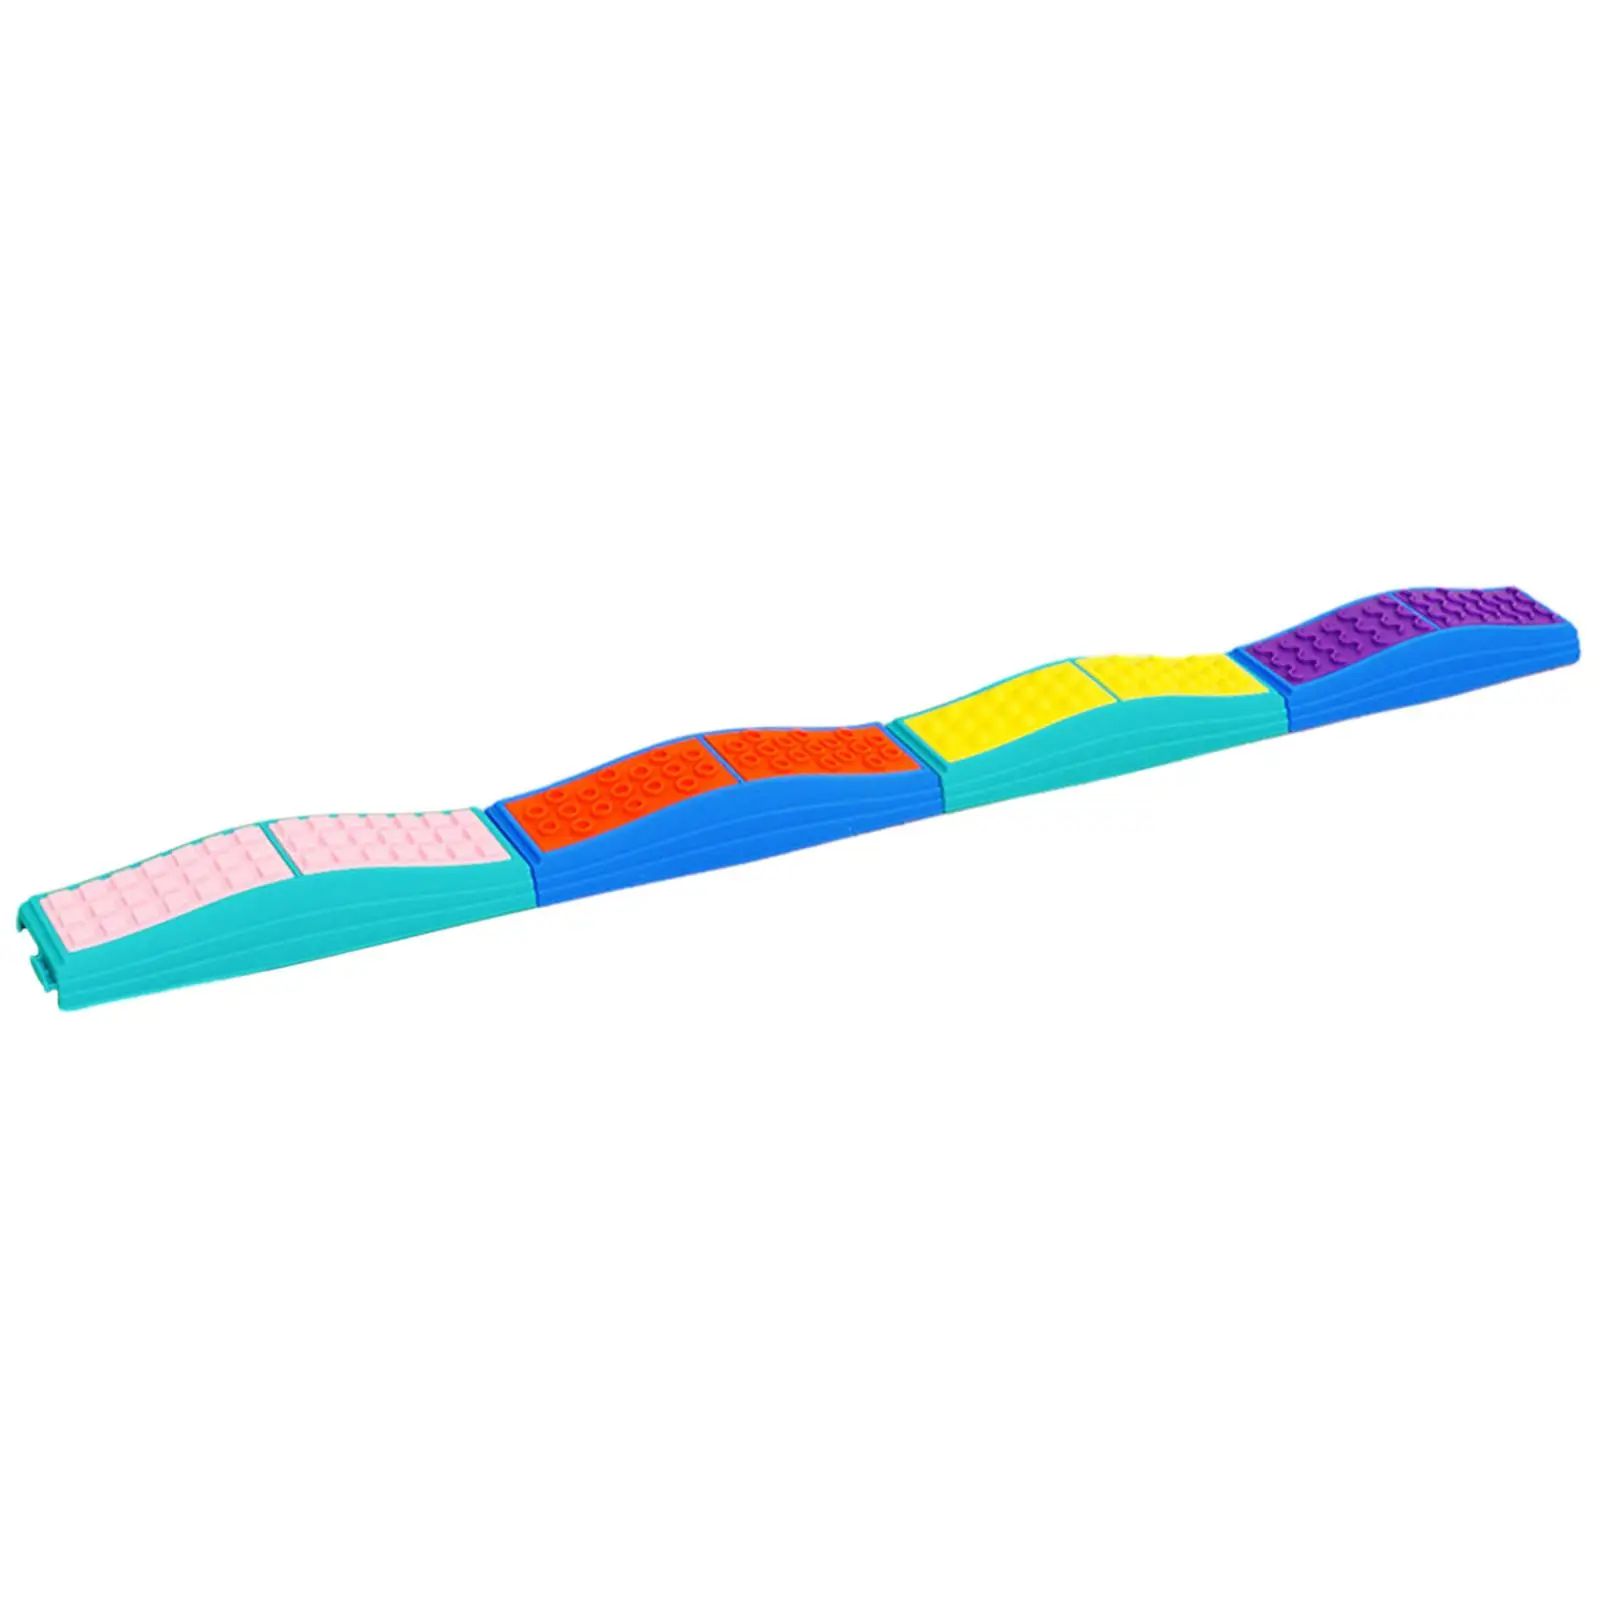 Colored Wavy Balance Beams Non Slip Textured Surface Promote Balance Strength Coordination Children Learning Toy Obstacle Course